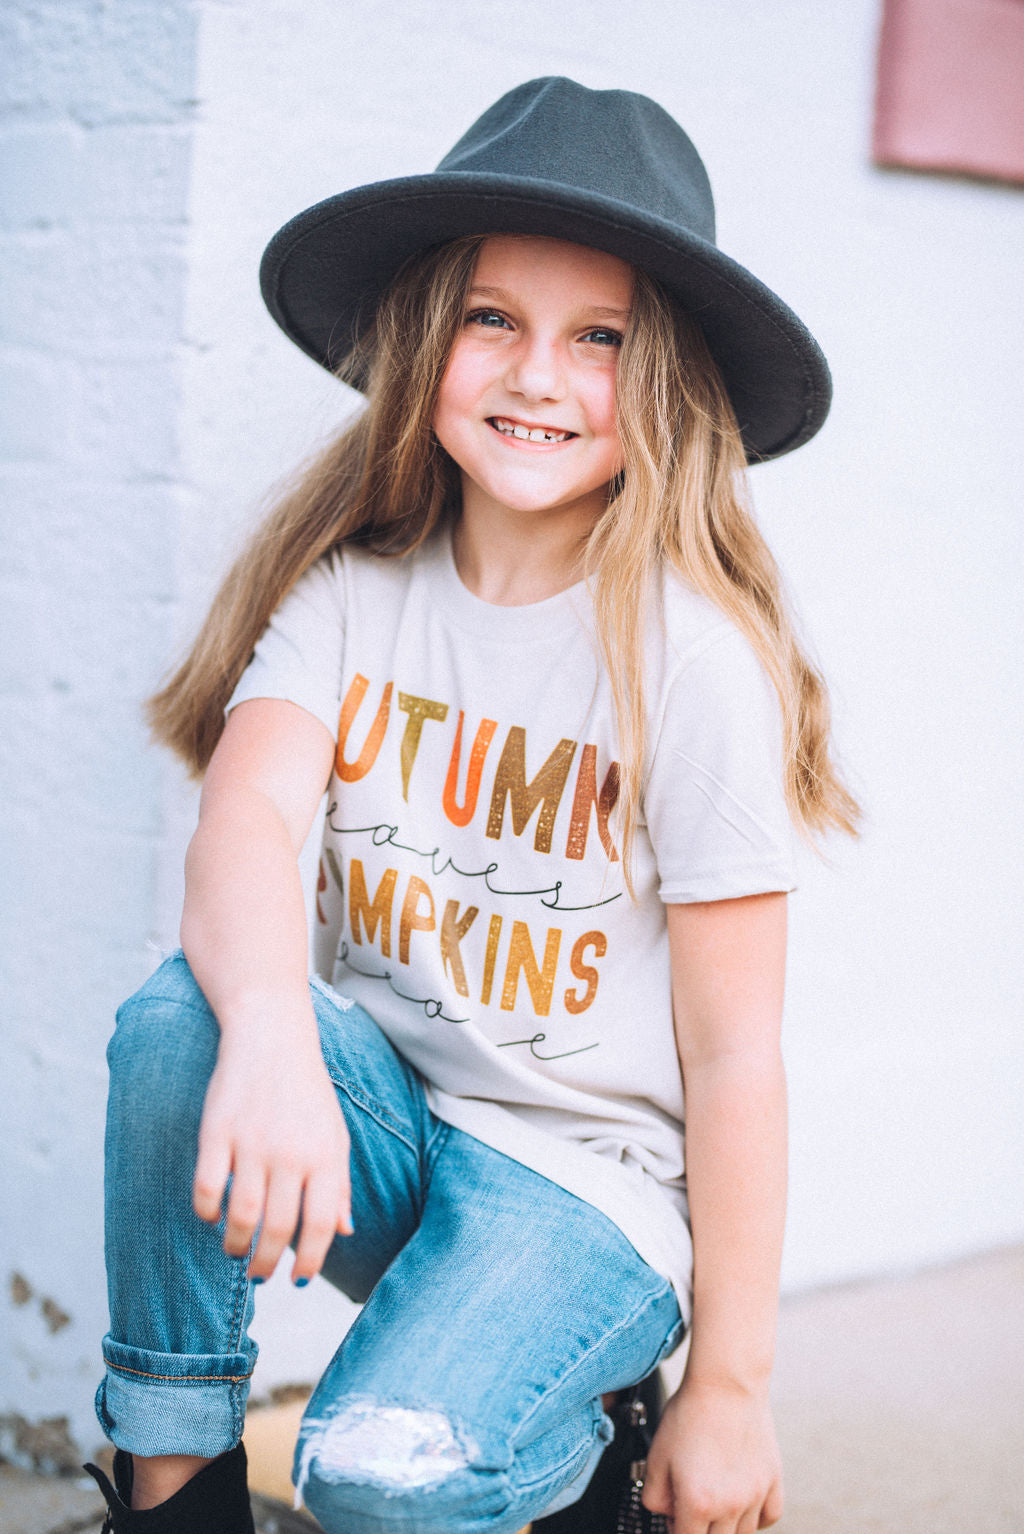 Autumn Leave Pumpkins Please- Mommy and Me Shirts - FALL Tee/ Bella Canvas / Fall Layering Tee / Teachers Tee